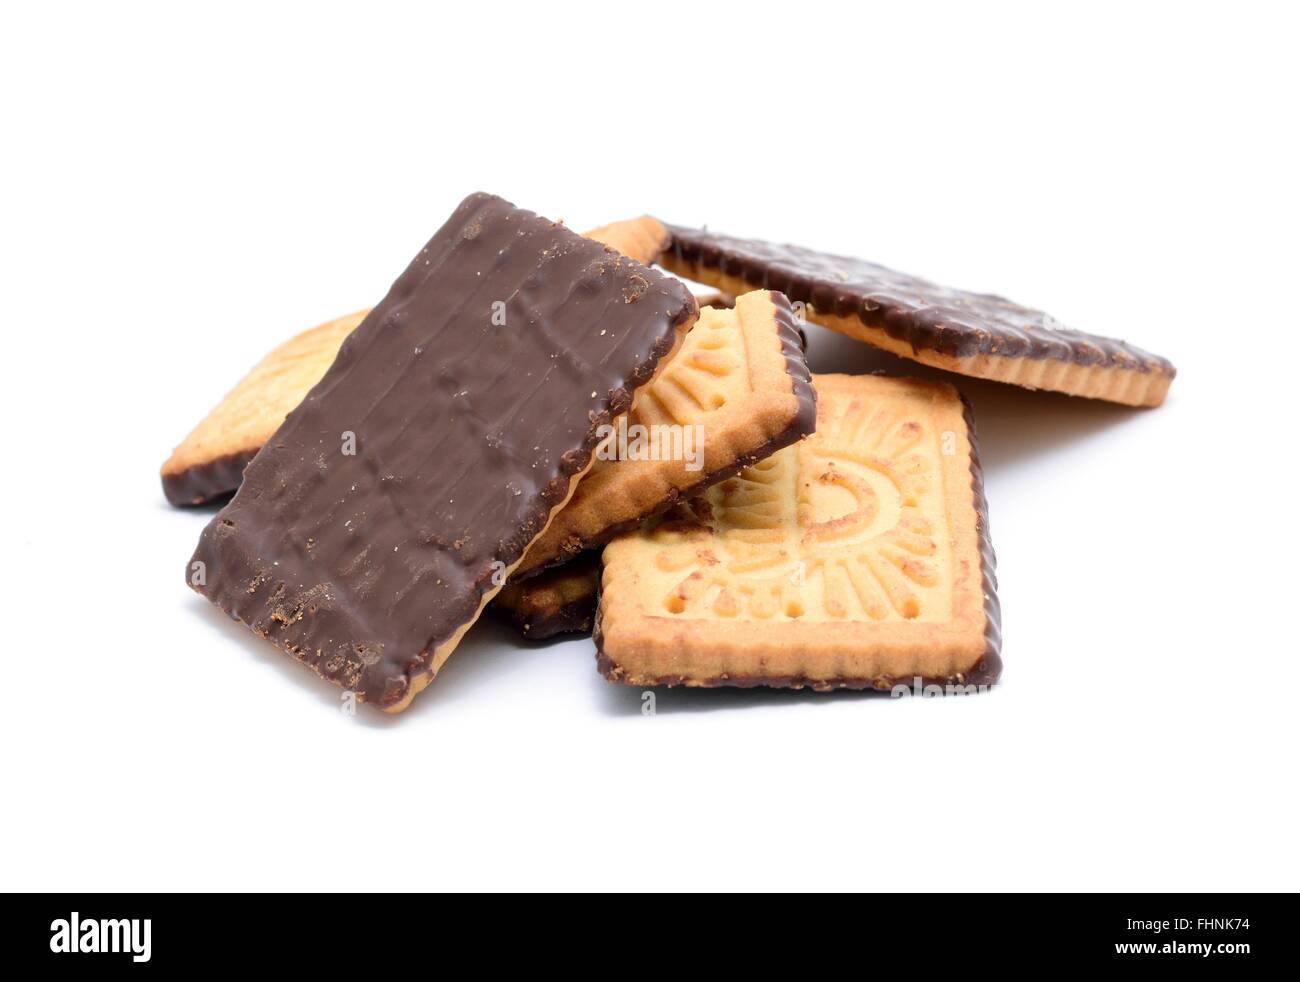 Stack of butter cookies with dark chocolate topping on a white background. Stock Photo